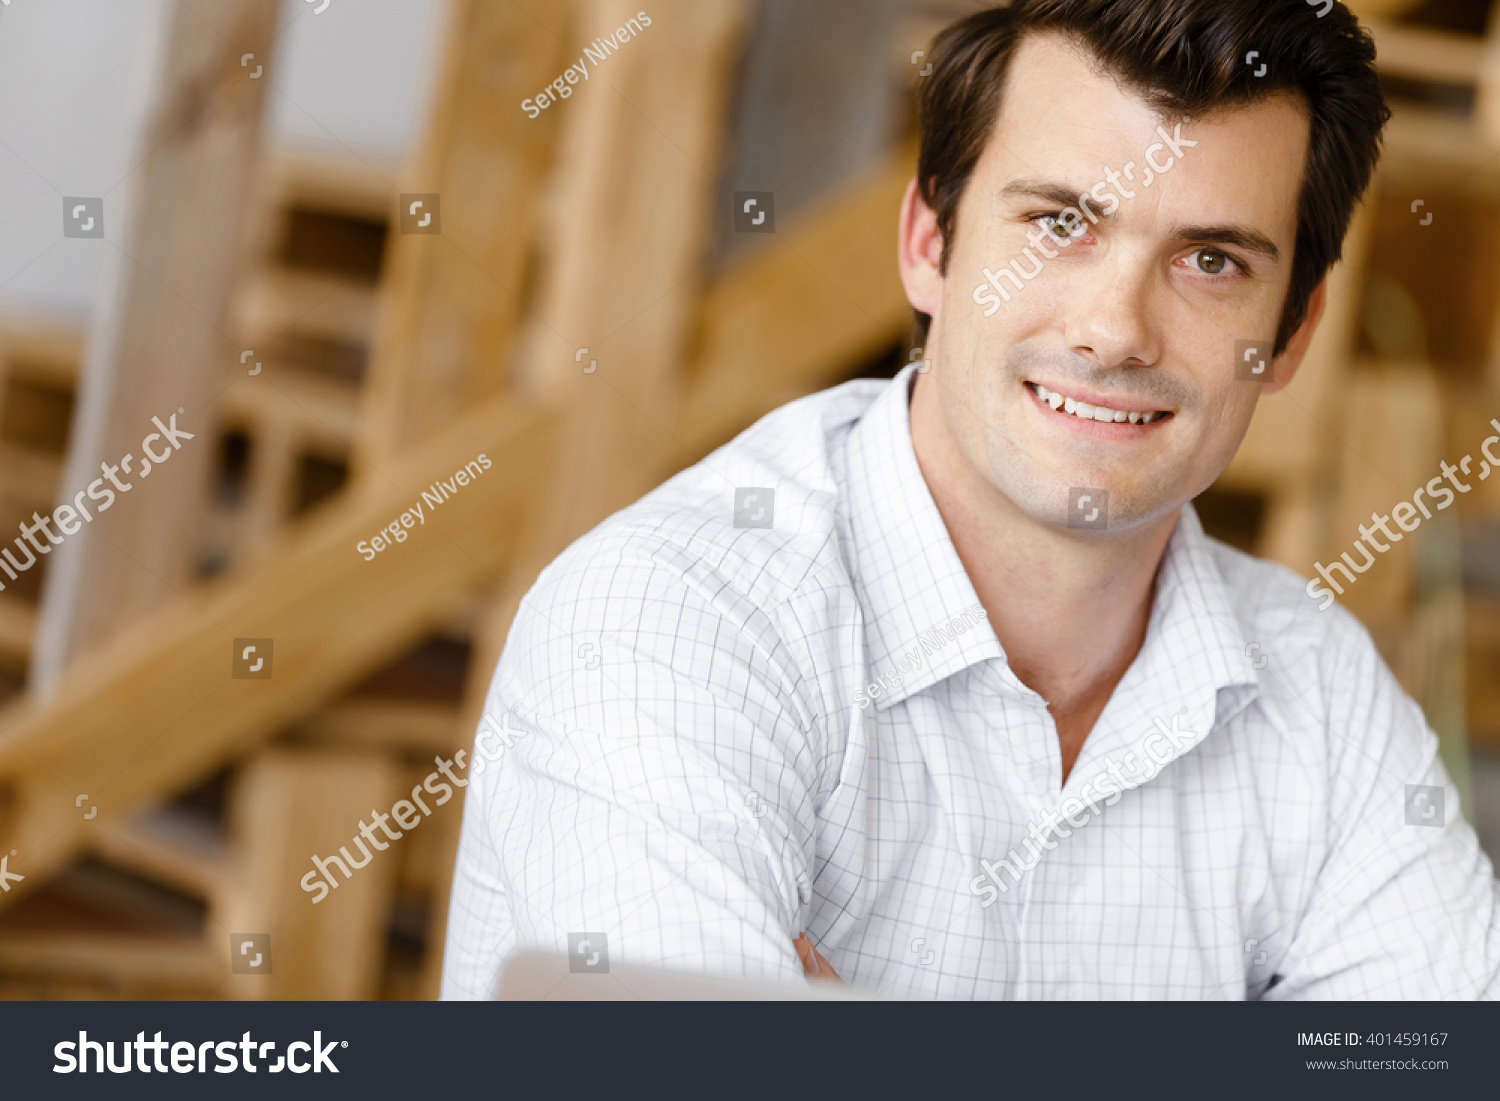 Young businessman in office #401459167